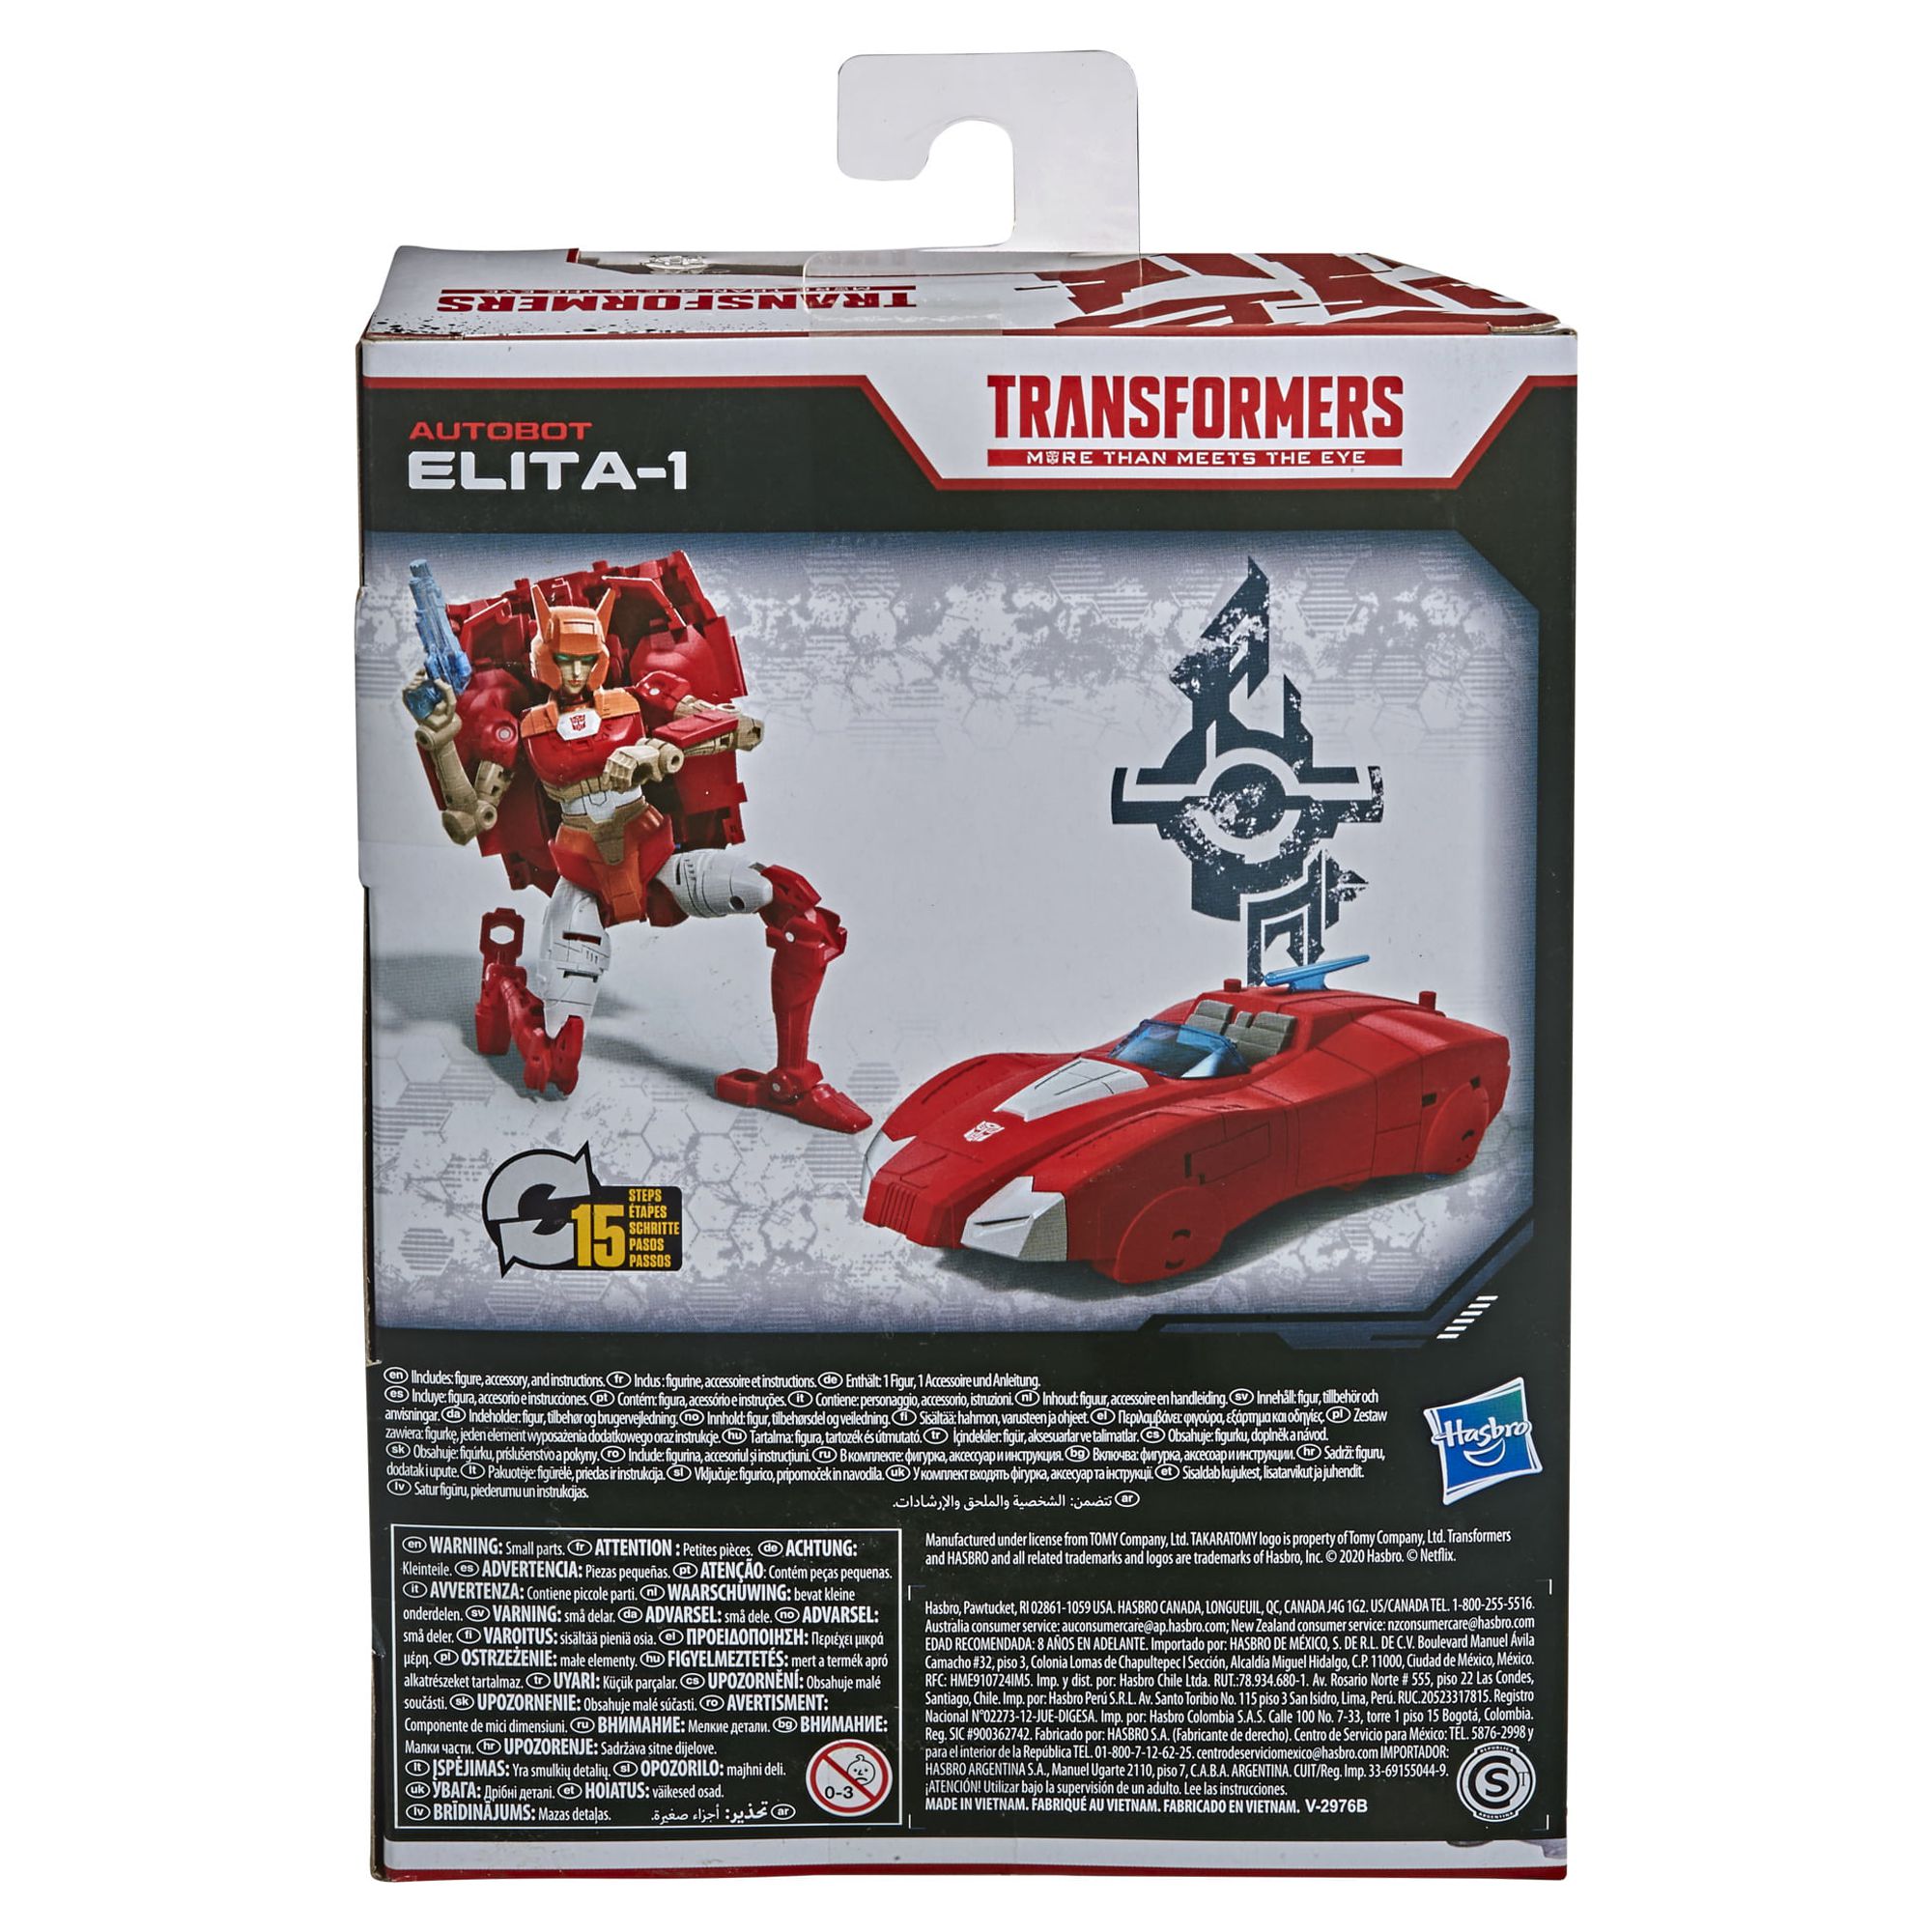 Transformers: War for Cybertron Autobot Elita 1 Kids Toy Action Figure for Boys and Girls (6") - image 4 of 5